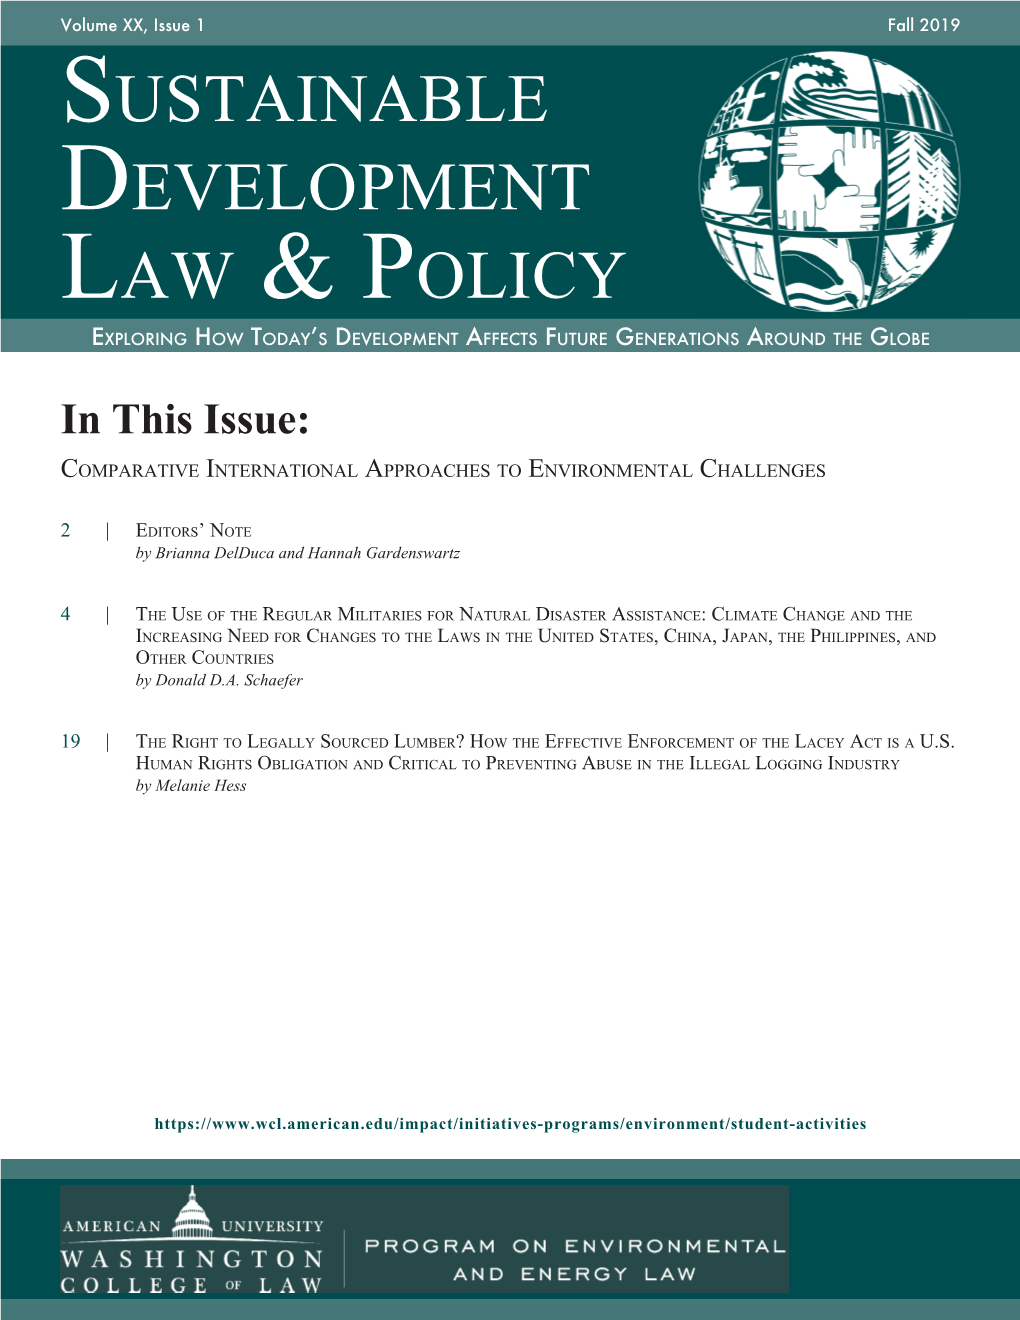 In This Issue: Comparative International Approaches to Environmental Challenges